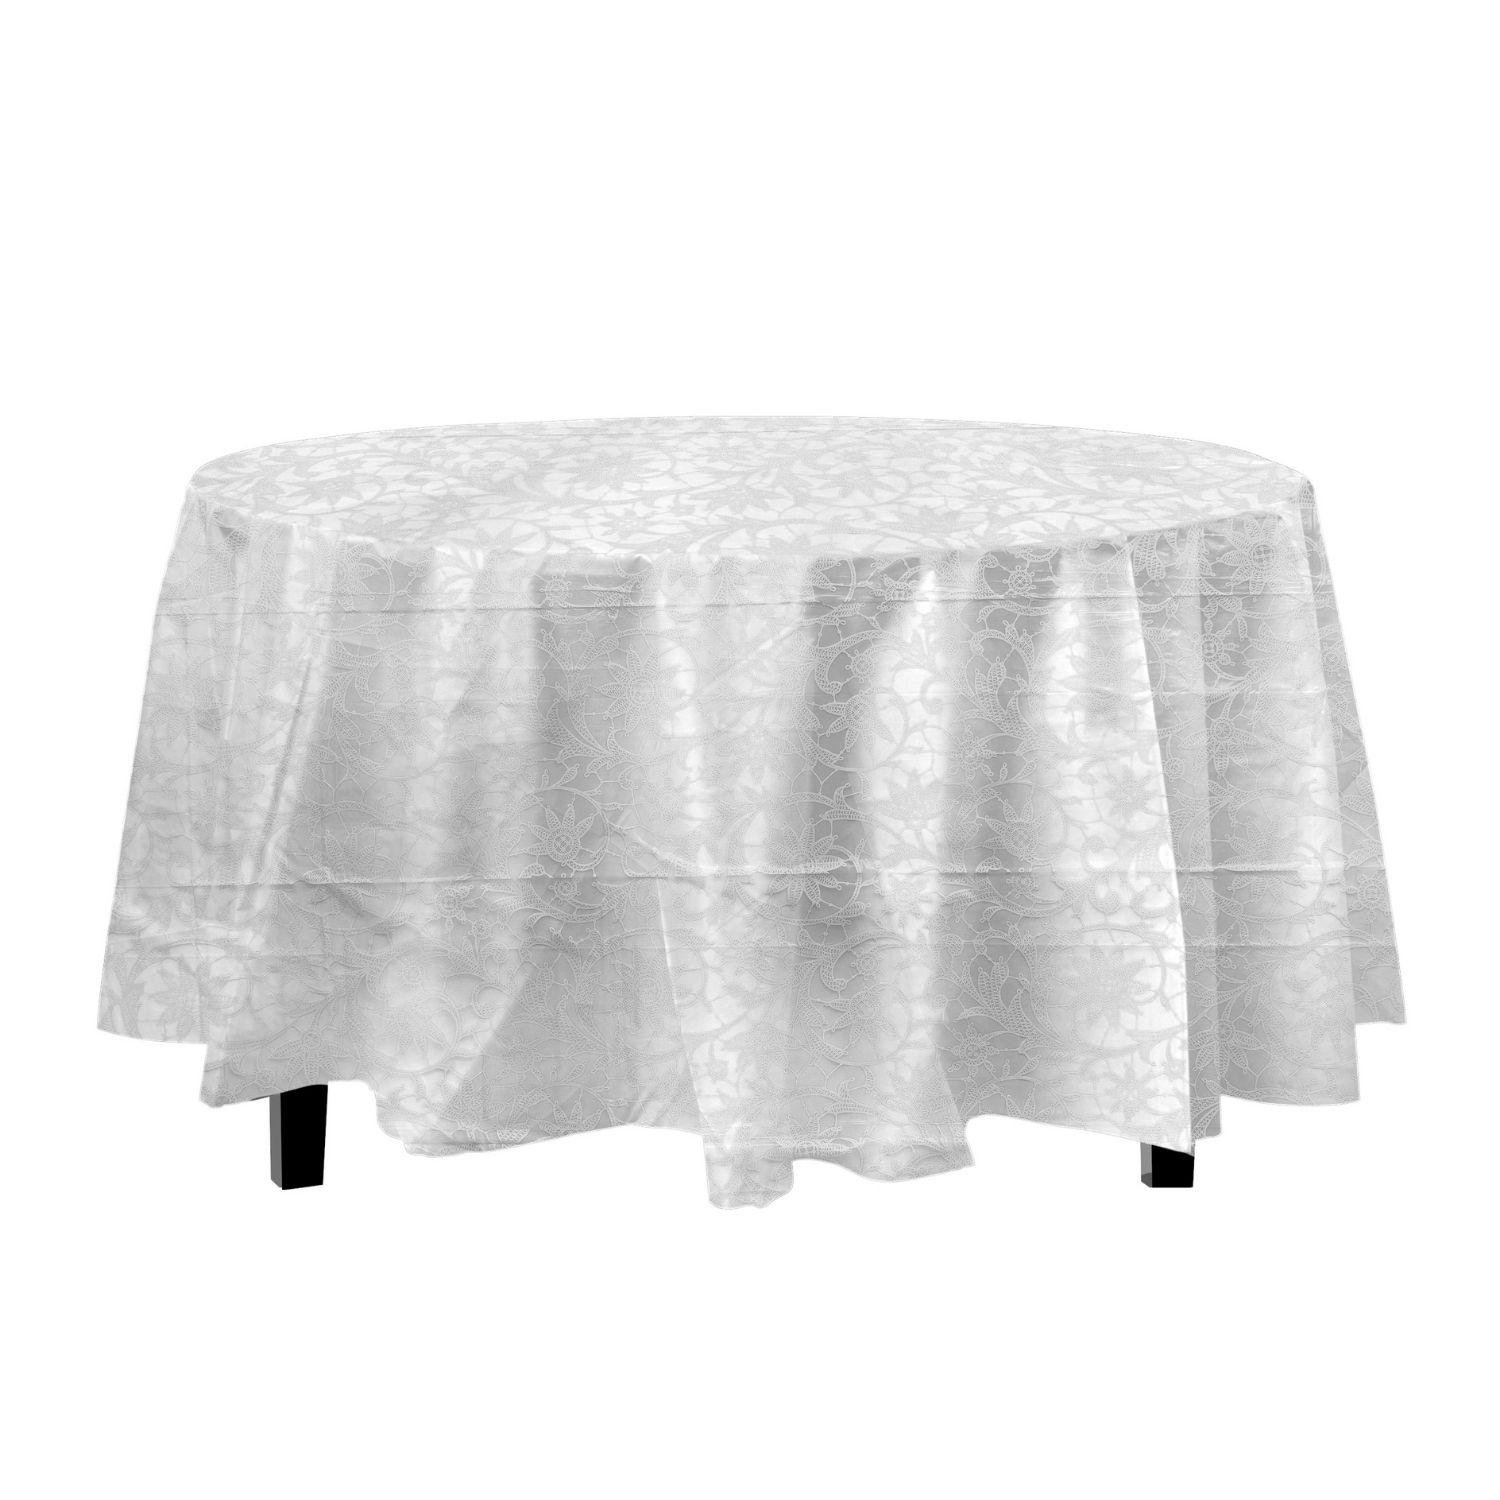 Party Supplies 1 Piece Black & White Checkered Round Plastic Tablecloth 